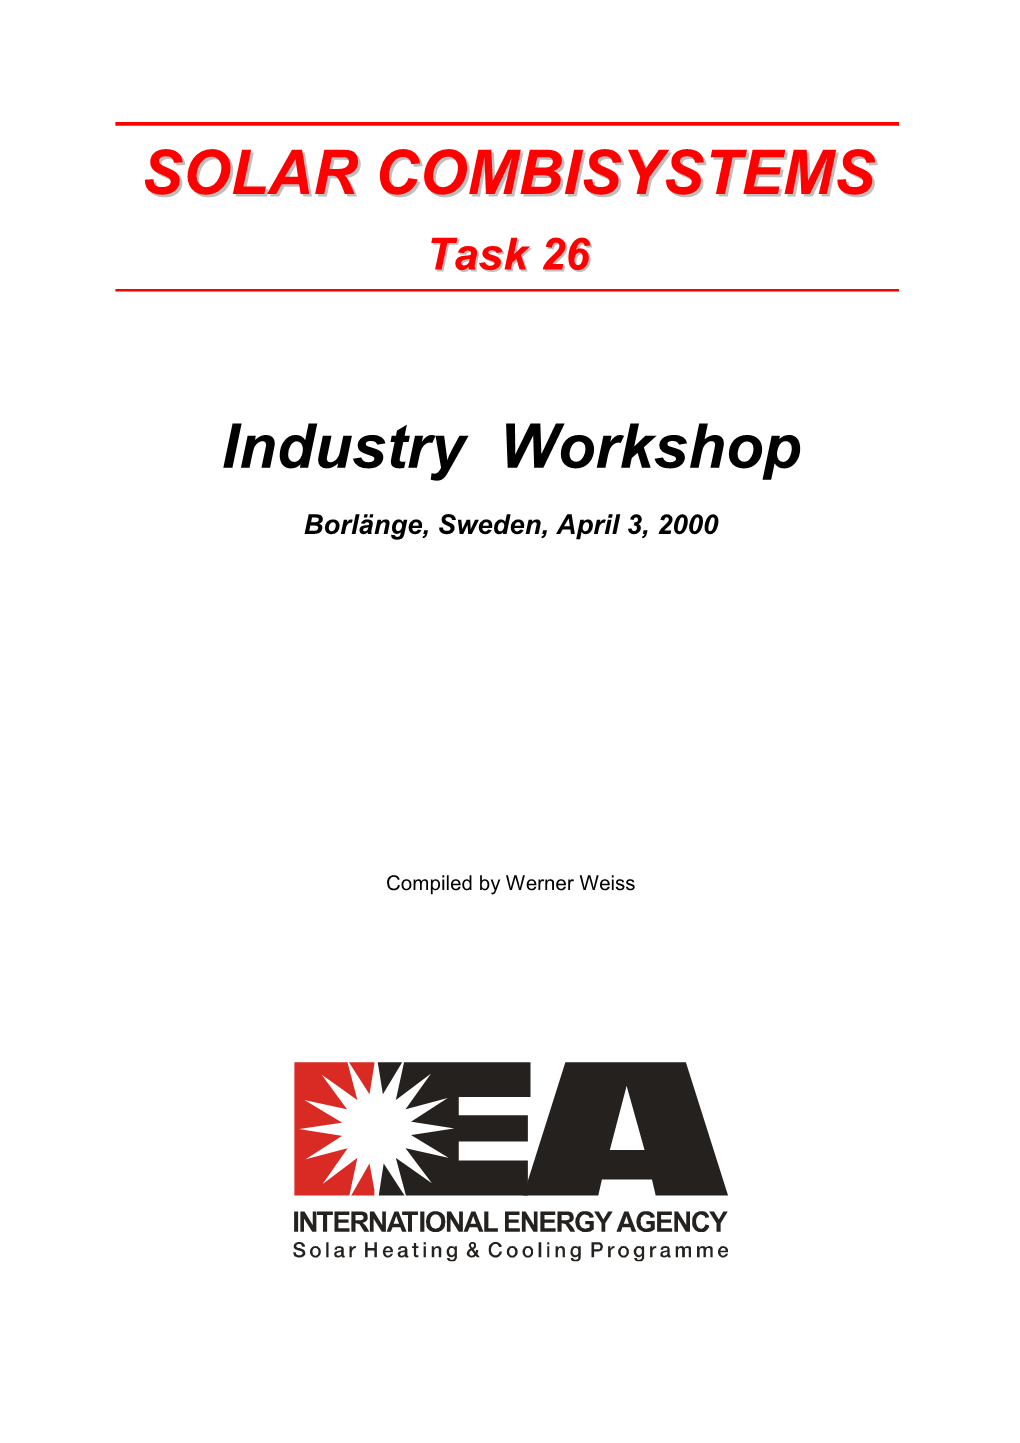 SOLAR COMBISYSTEMS Industry Workshop